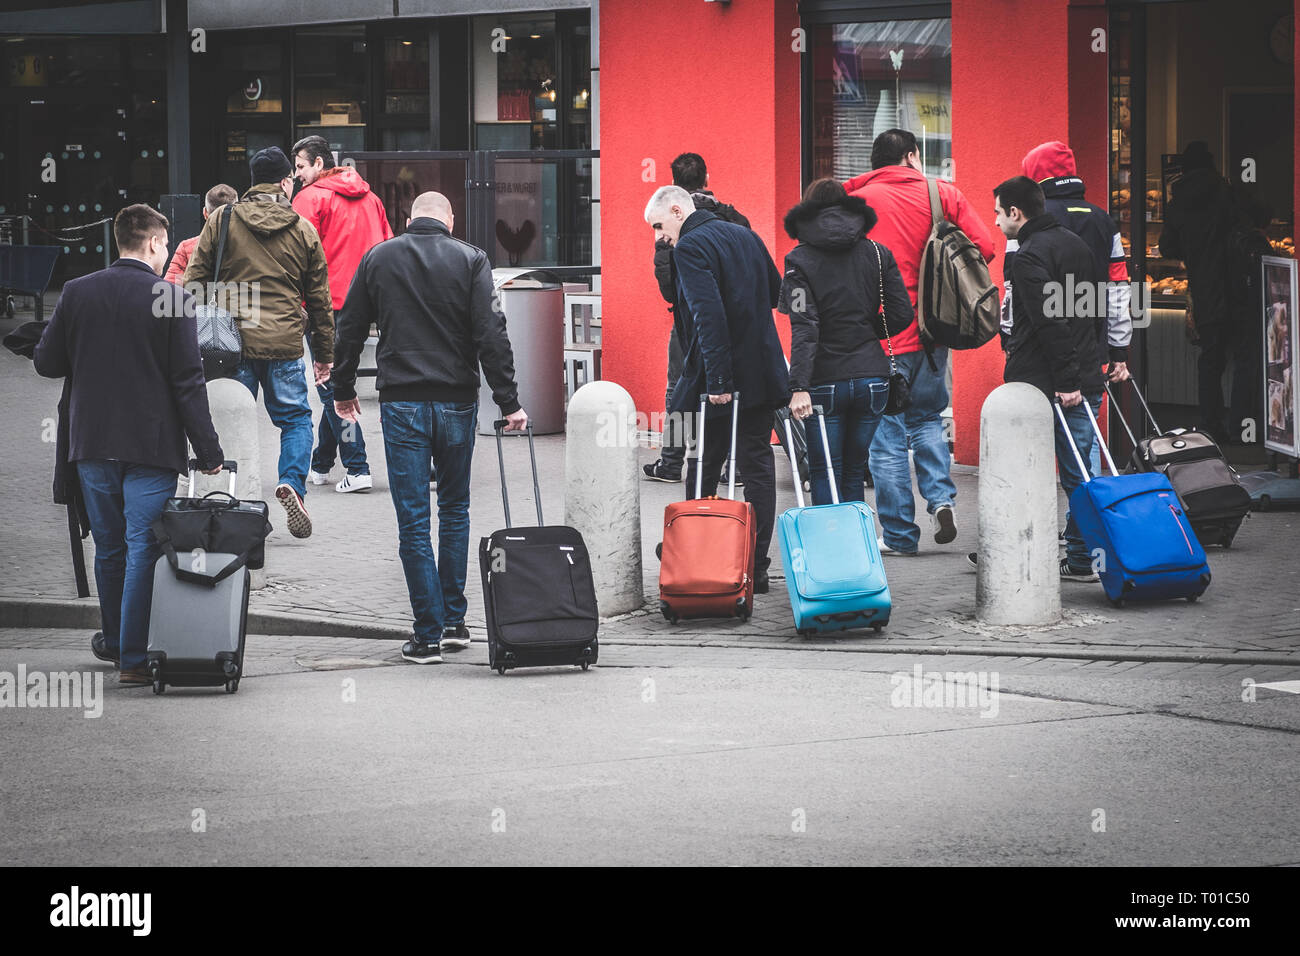 Berlin, Germany - march 2019: People with cabin luggage and trolley walking at airport Schoenefeld in Berlin Stock Photo